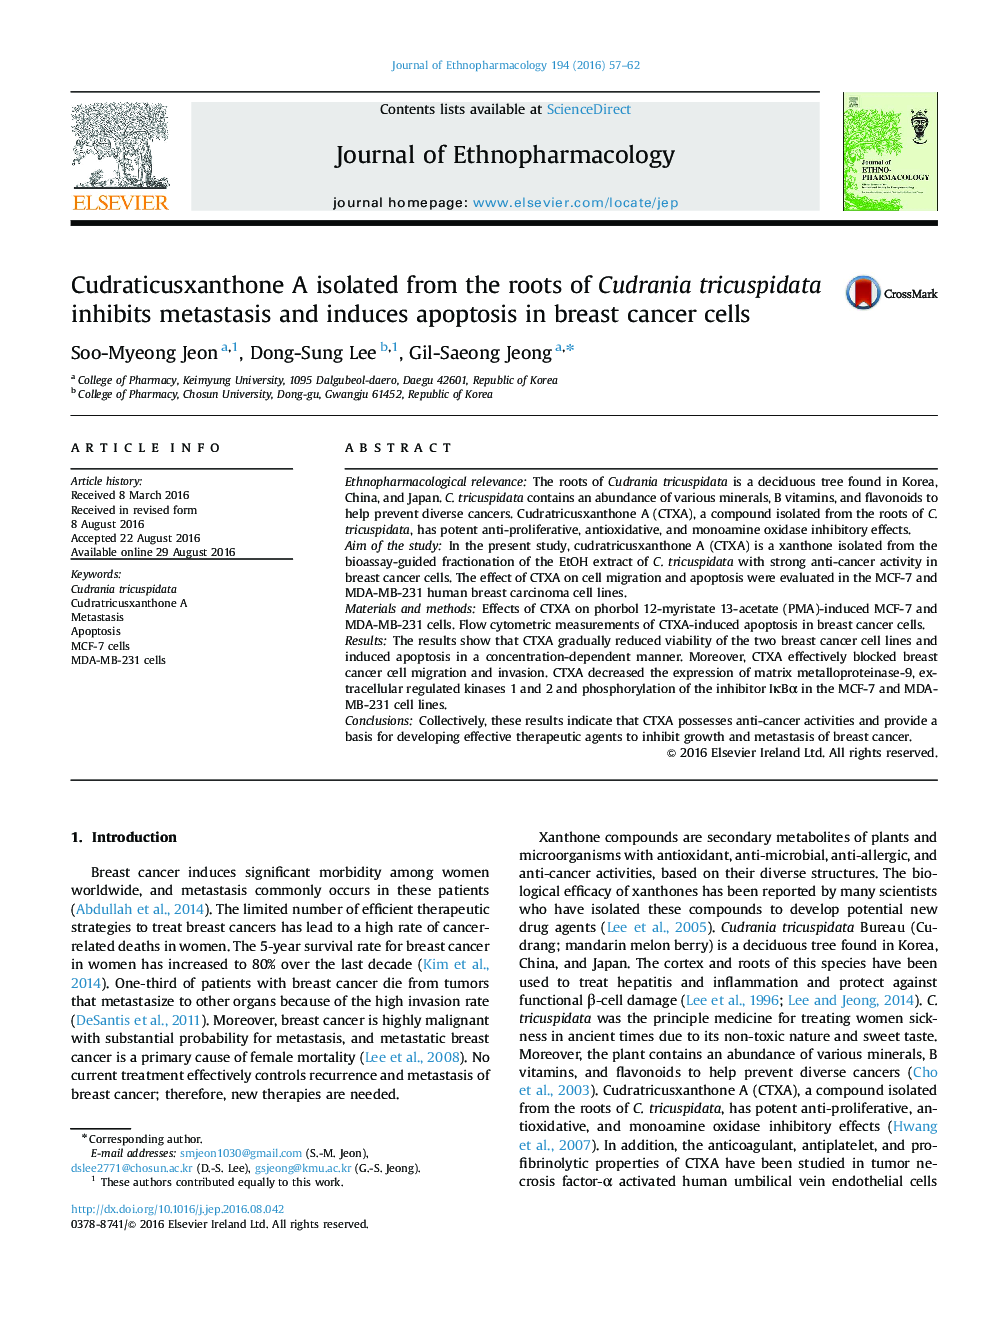 Cudraticusxanthone A isolated from the roots of Cudrania tricuspidata inhibits metastasis and induces apoptosis in breast cancer cells